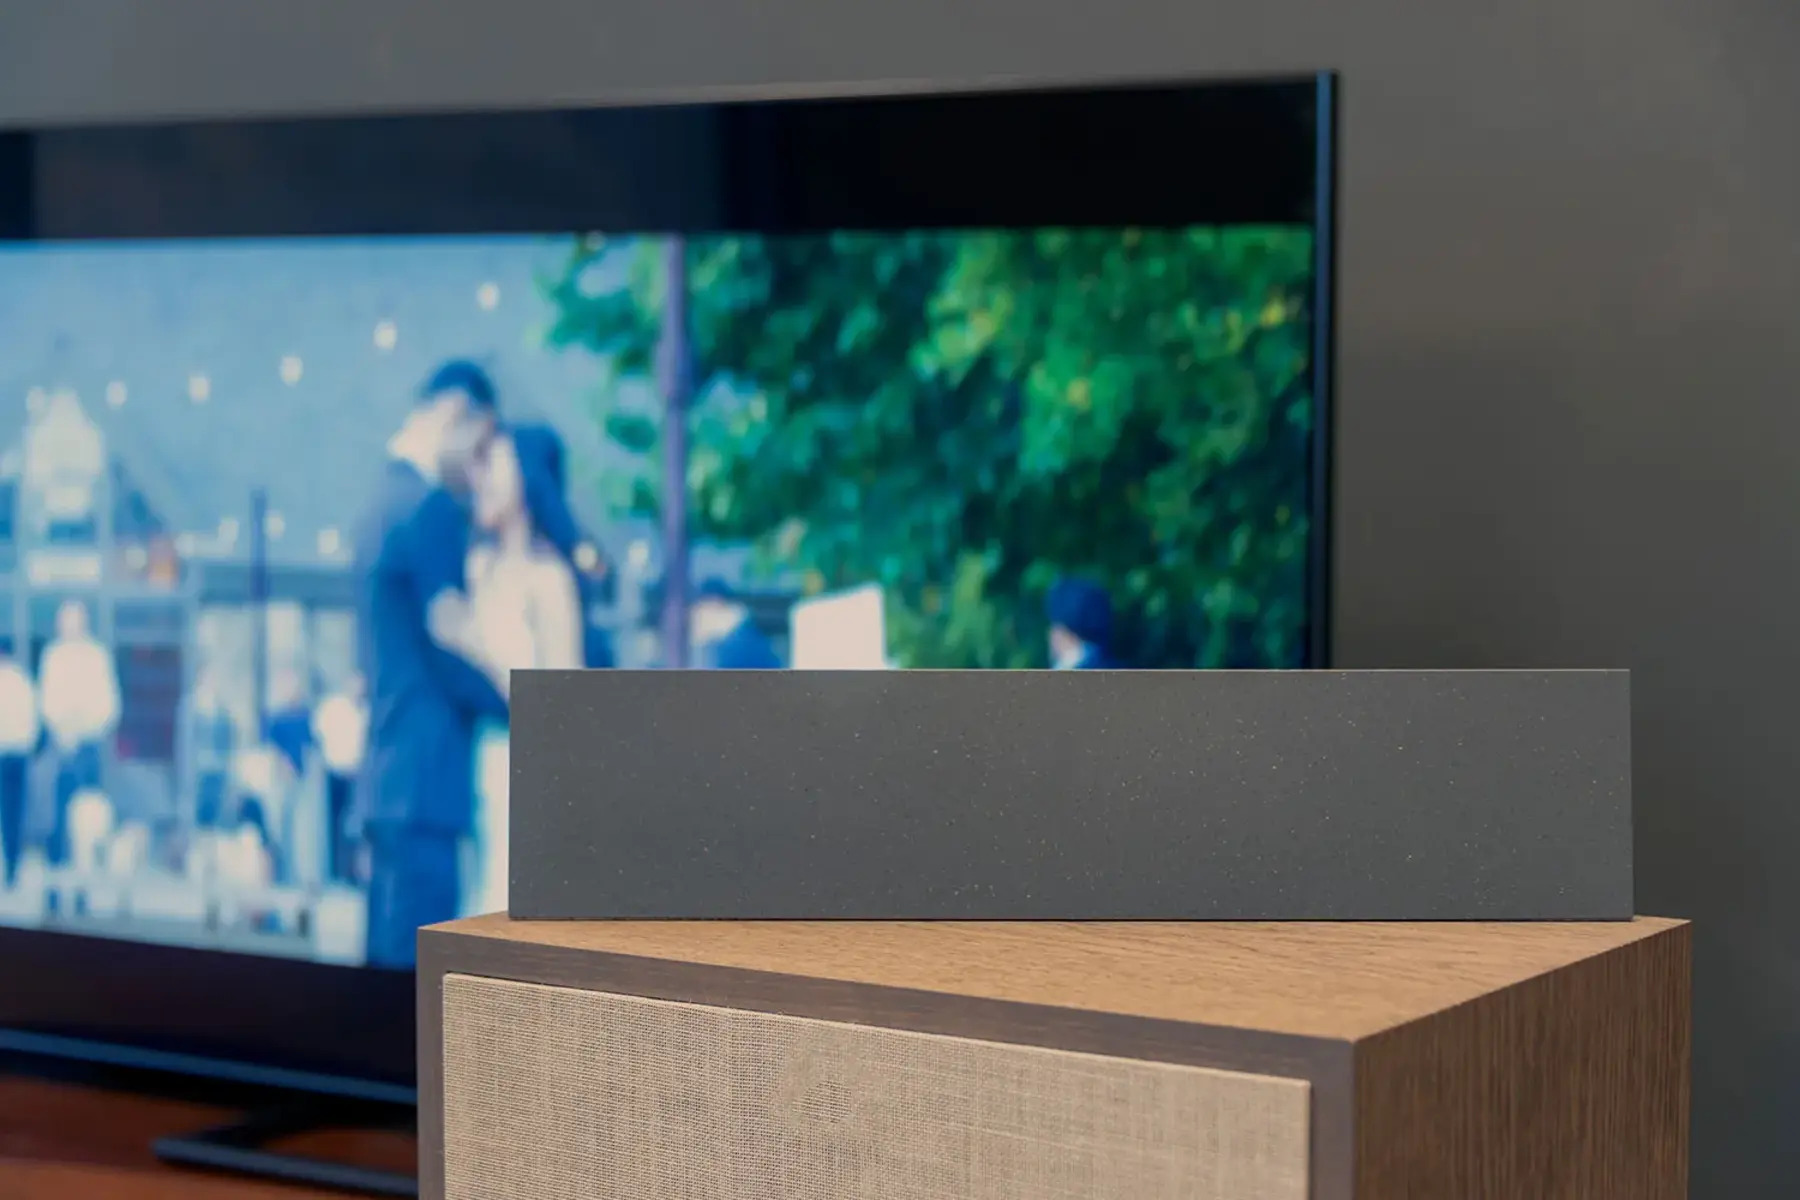 mohu-blade-tv-antenna-review-a-unique-design-and-good-indoor-performance